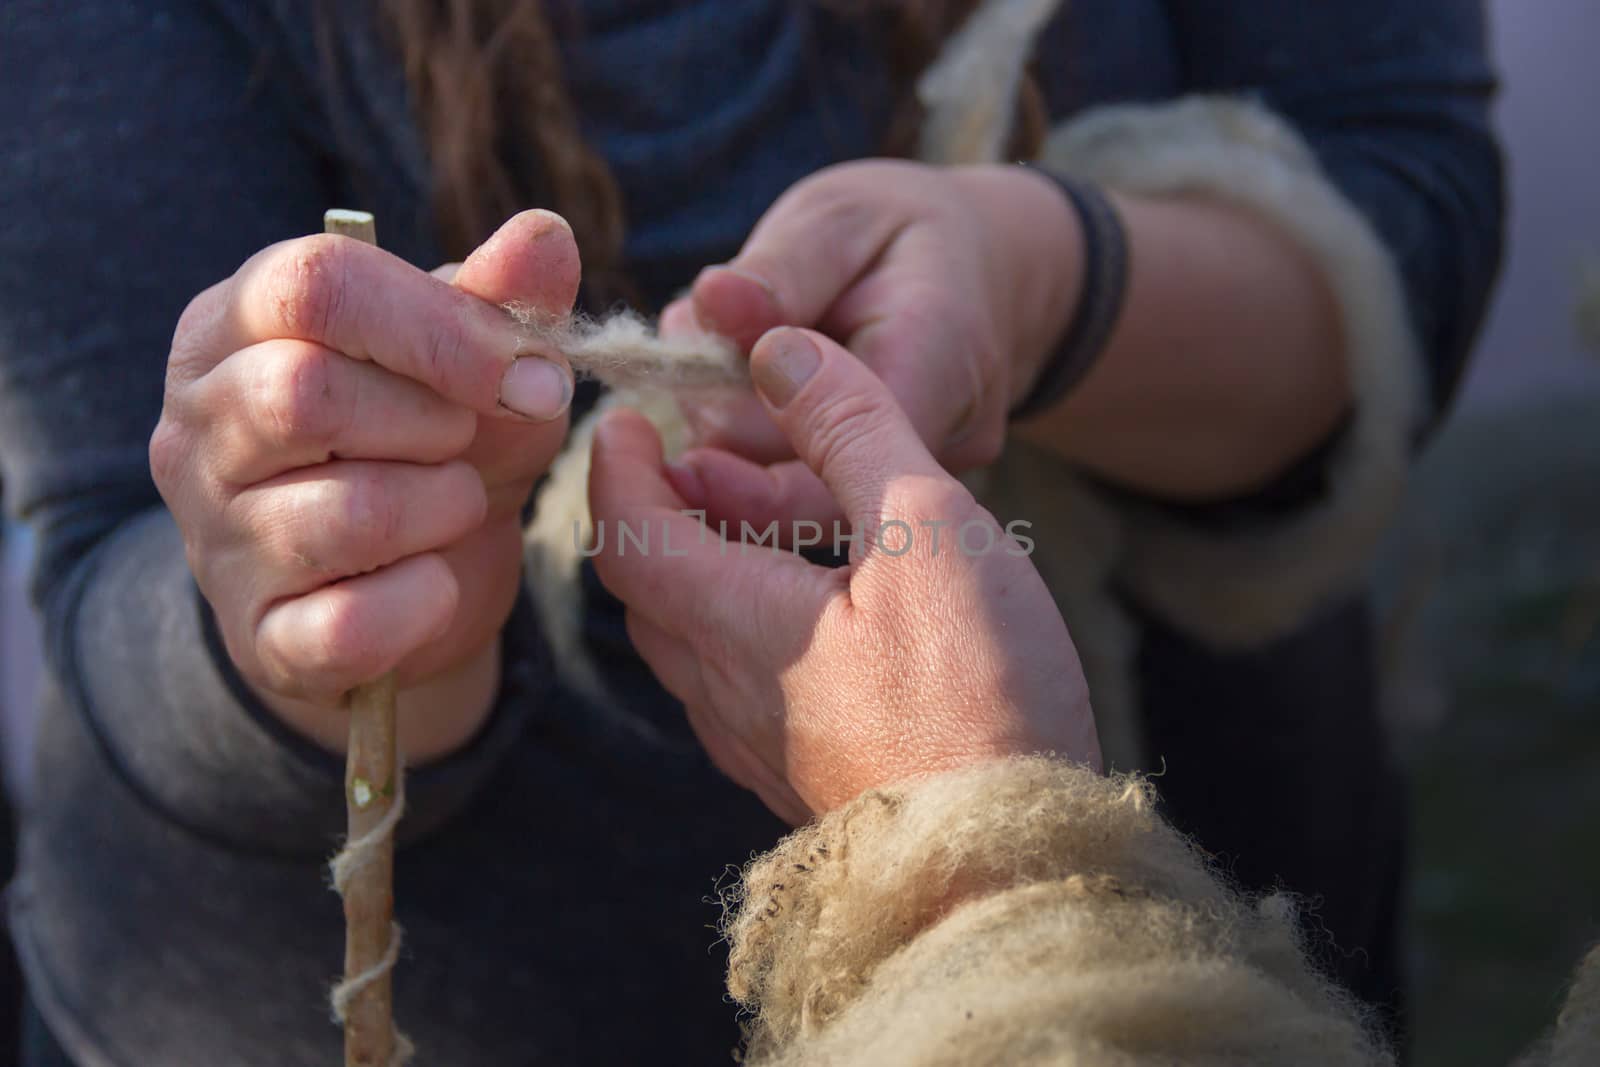 the hands that spin wool fleece by hand by GabrielaBertolini